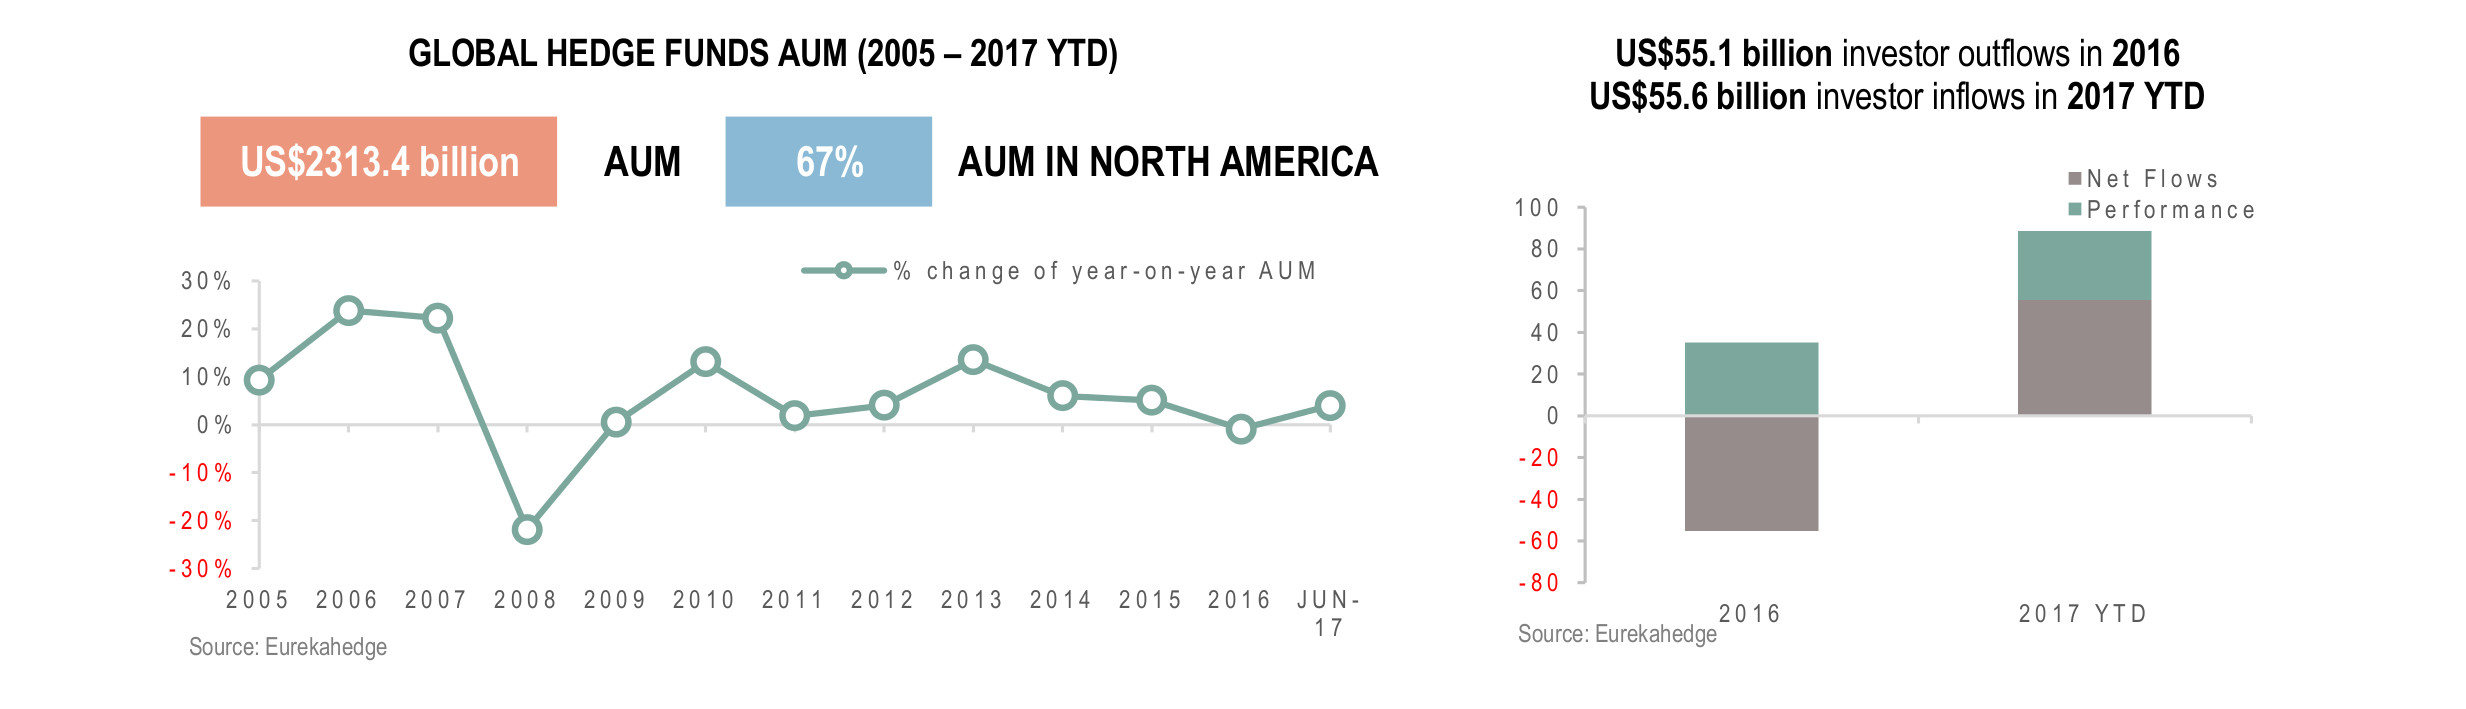 Global Hedge Fund Infographic August 2017- AUM